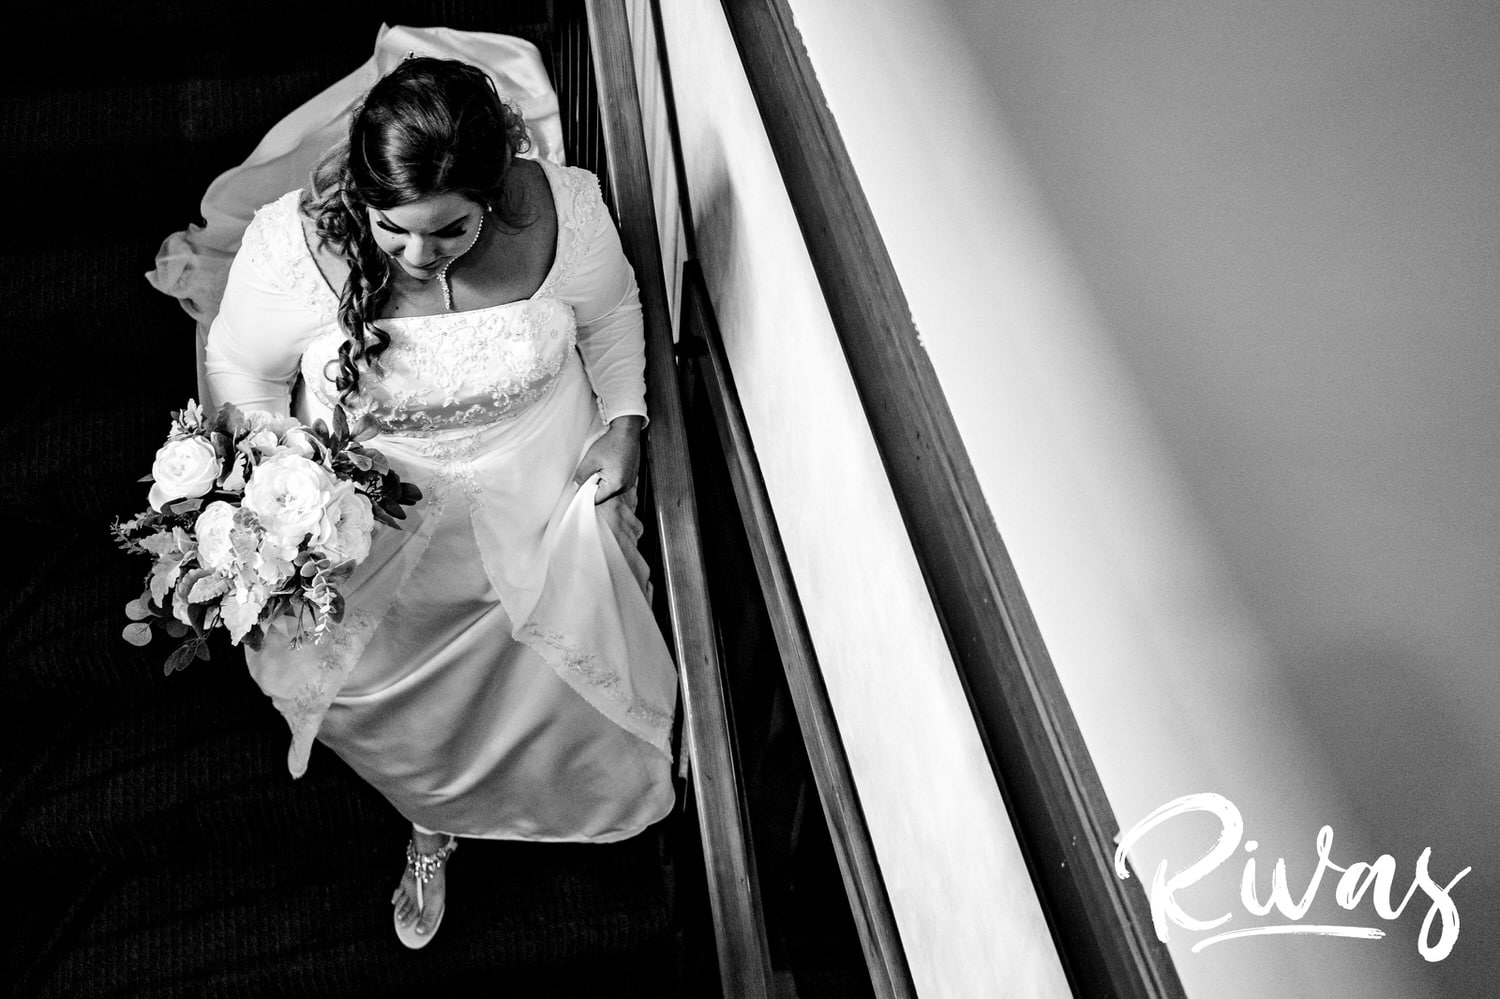 A candid black and white picture of a bride holding her bouquet and skirt as she walks down a flight of stairs to get married on her wedding day. 